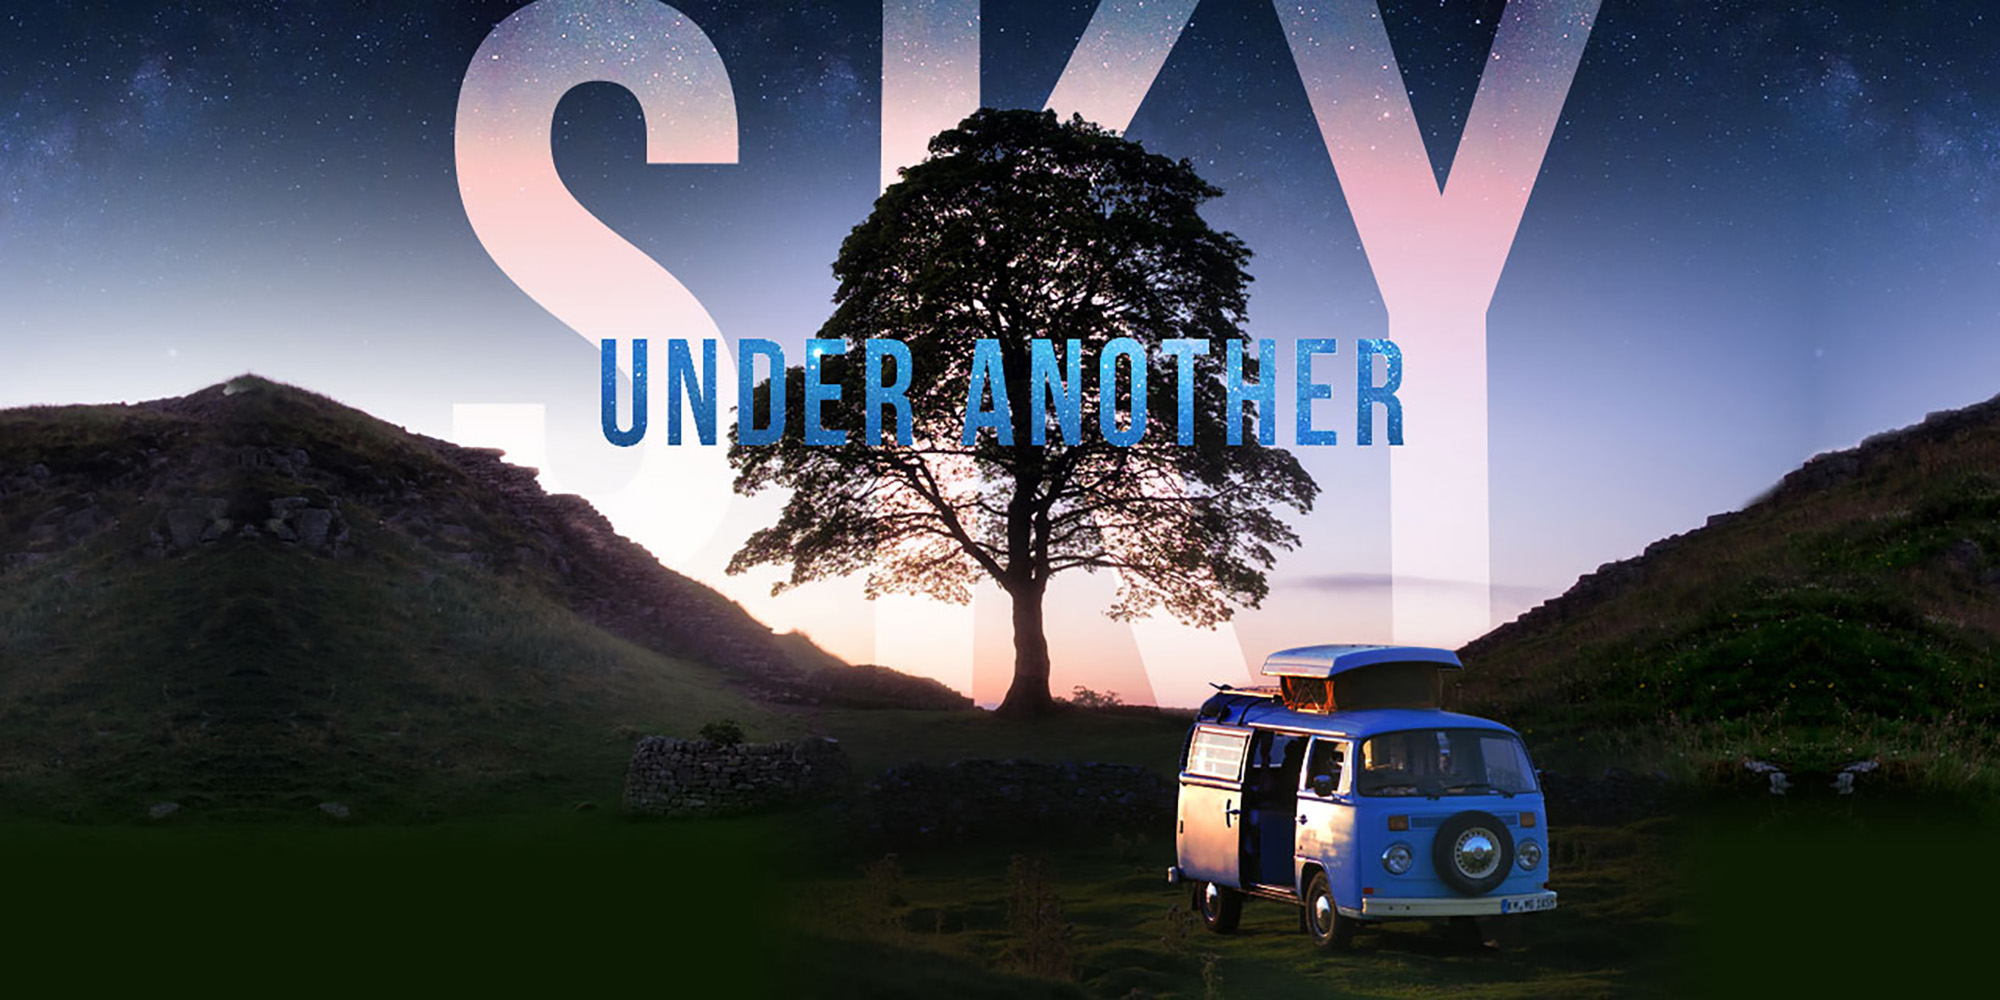 Blue camper van next to a tree in front of some hills under the night sky